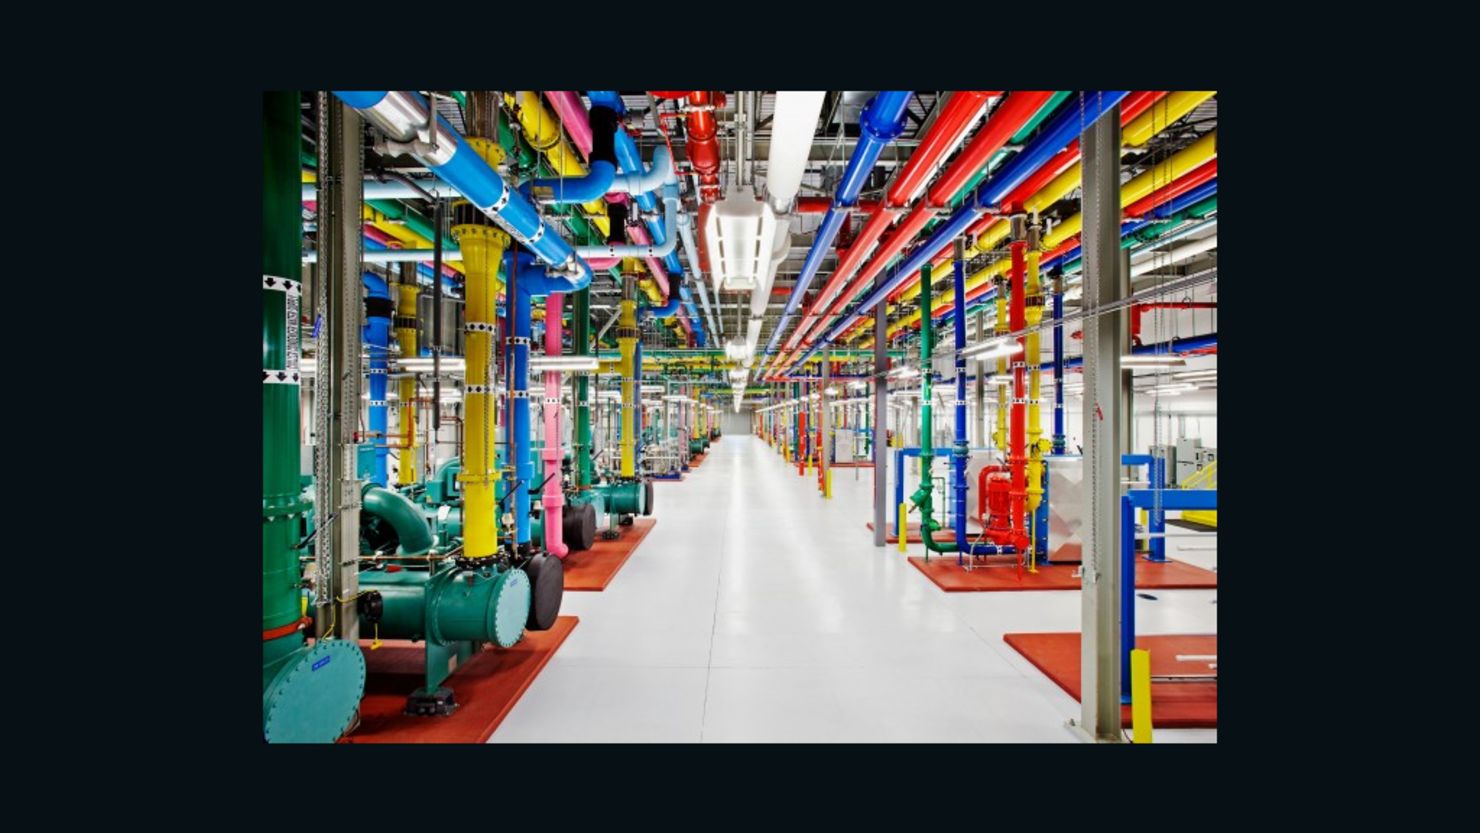 A central cooling plant at Google's data center in Douglas County, Georgia, features the company's iconic muli-colored design.